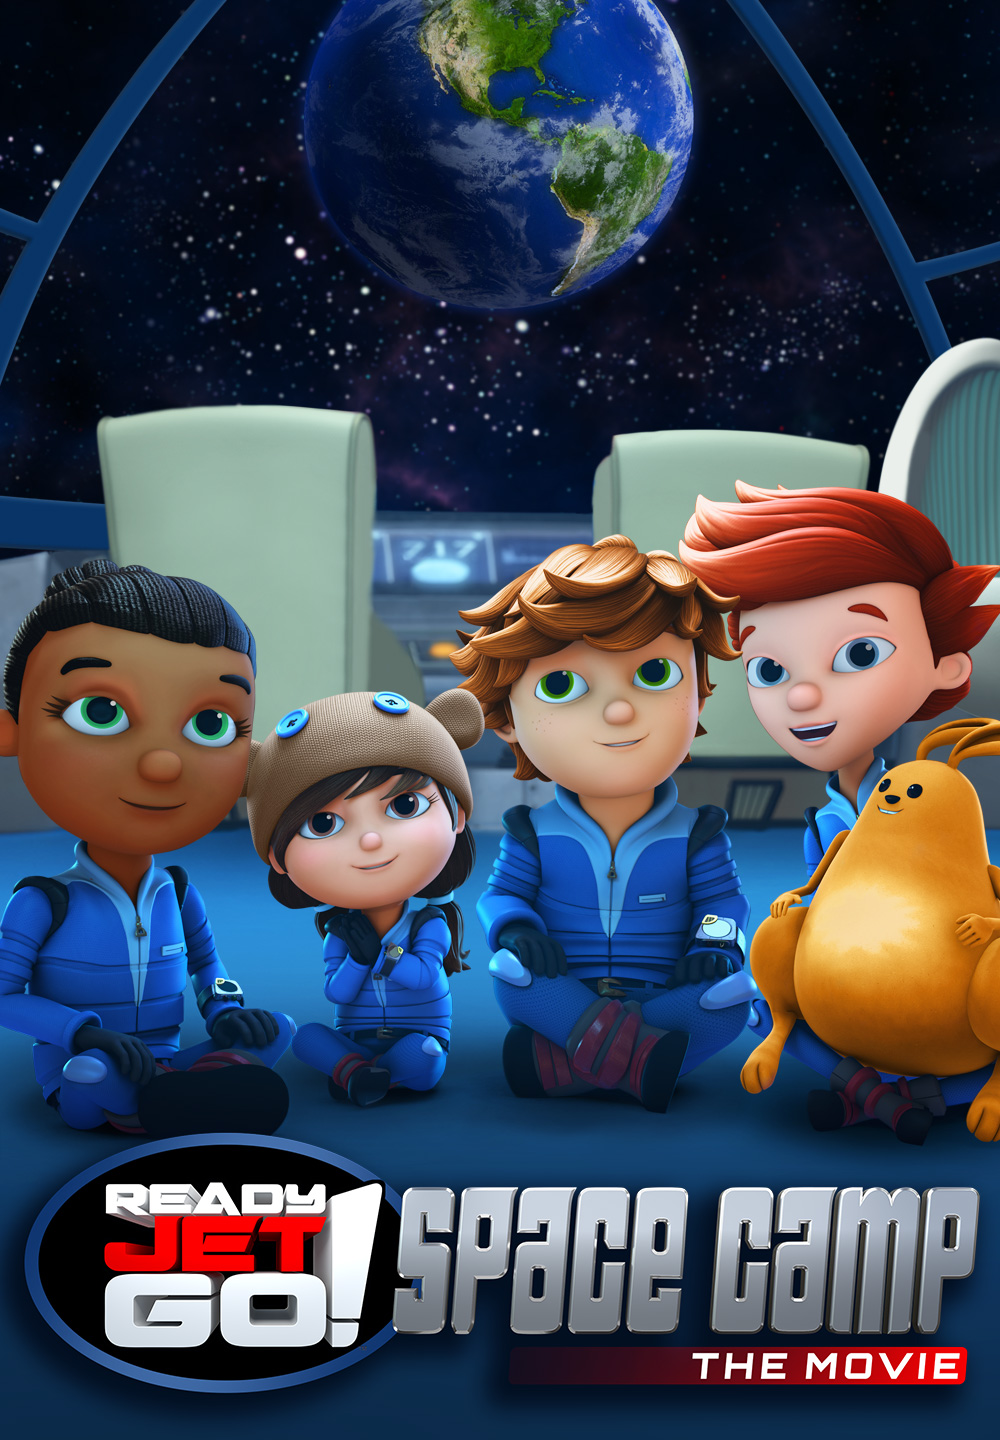 Ready, Jet, Go! Space Camp: The Movie - Digital Code - HD